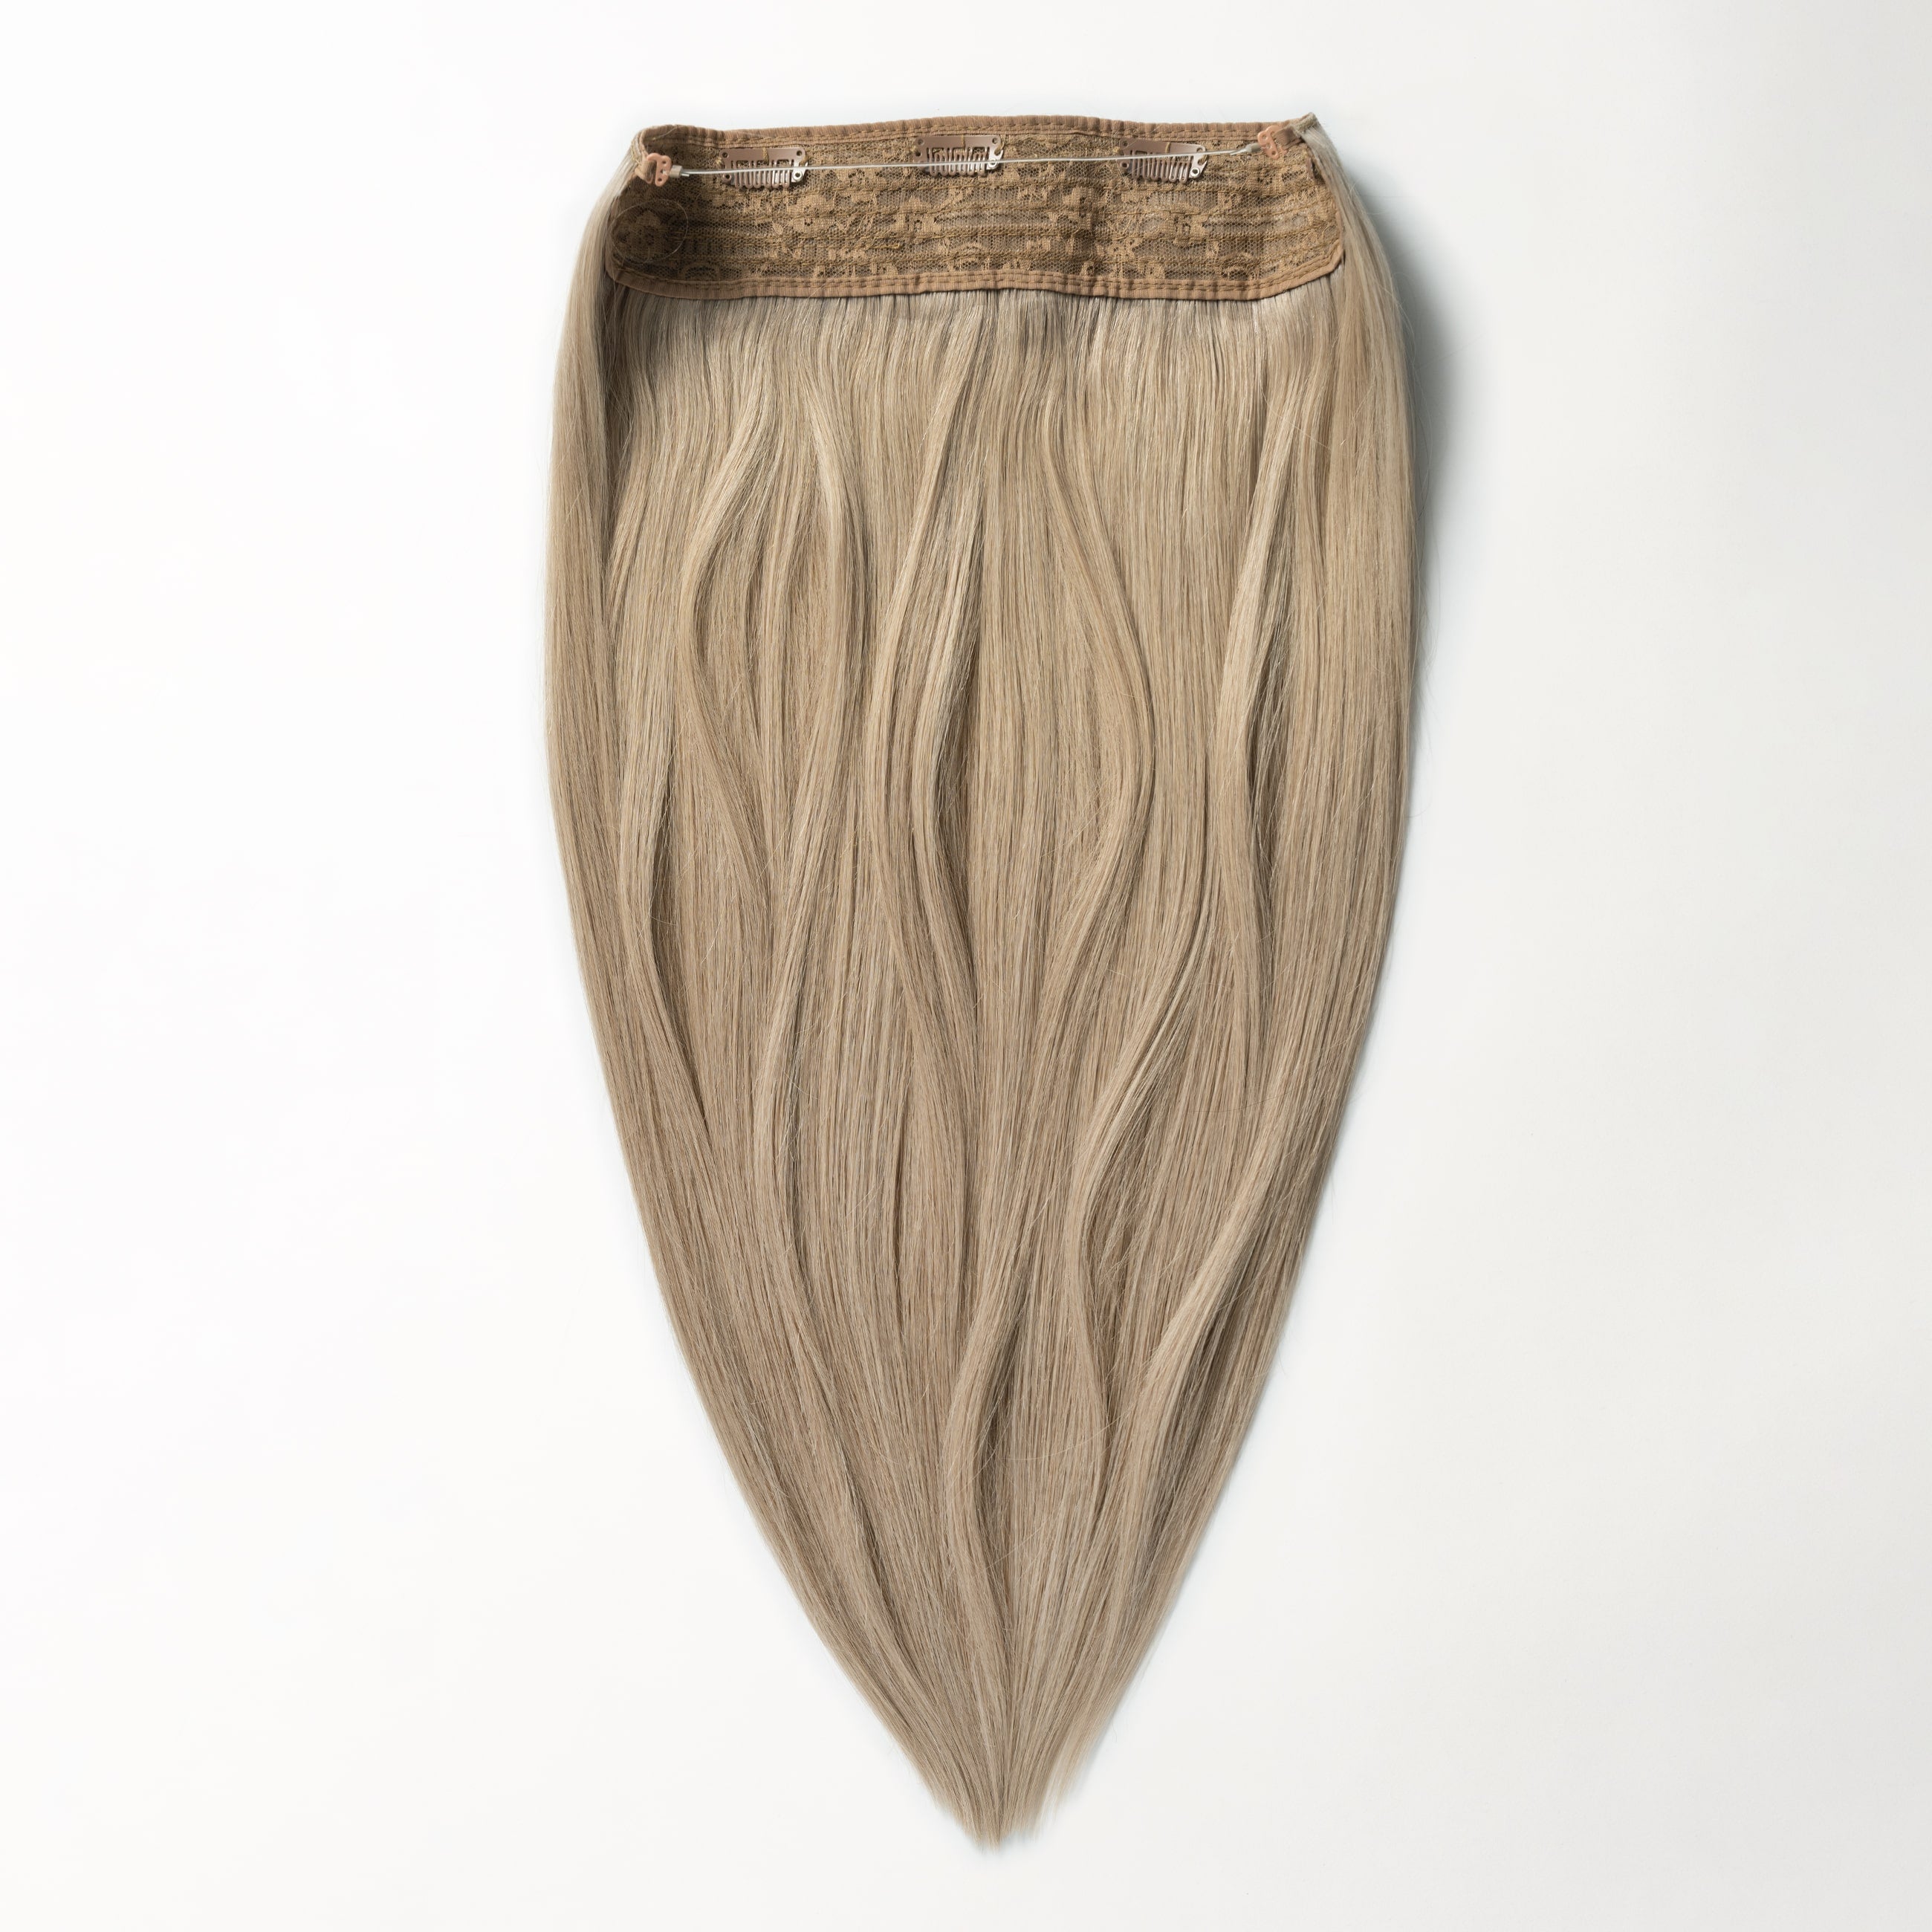 Halo hair extensions - Ash Blonde 17B